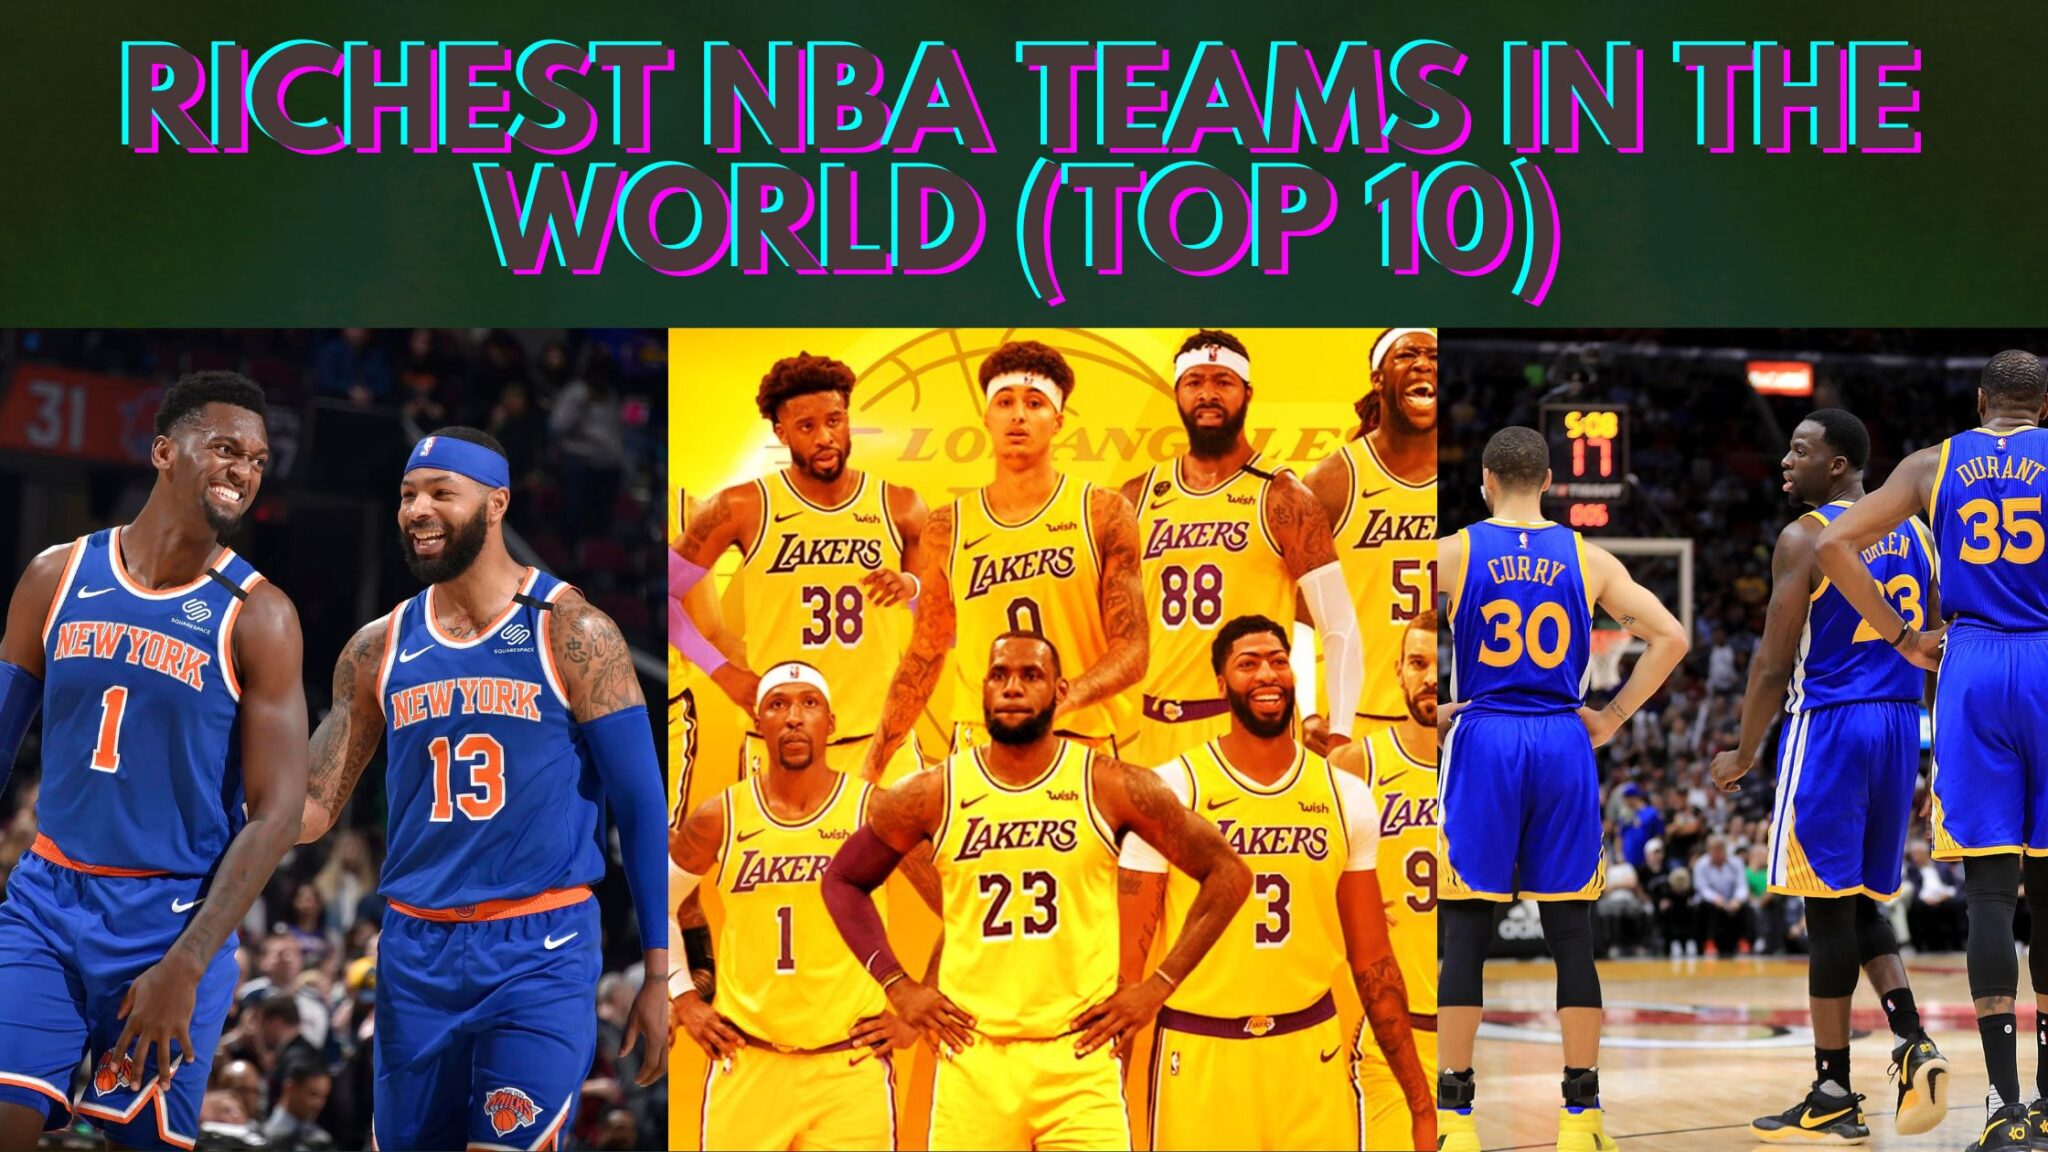 Richest NBA Teams In The World (Top 10)